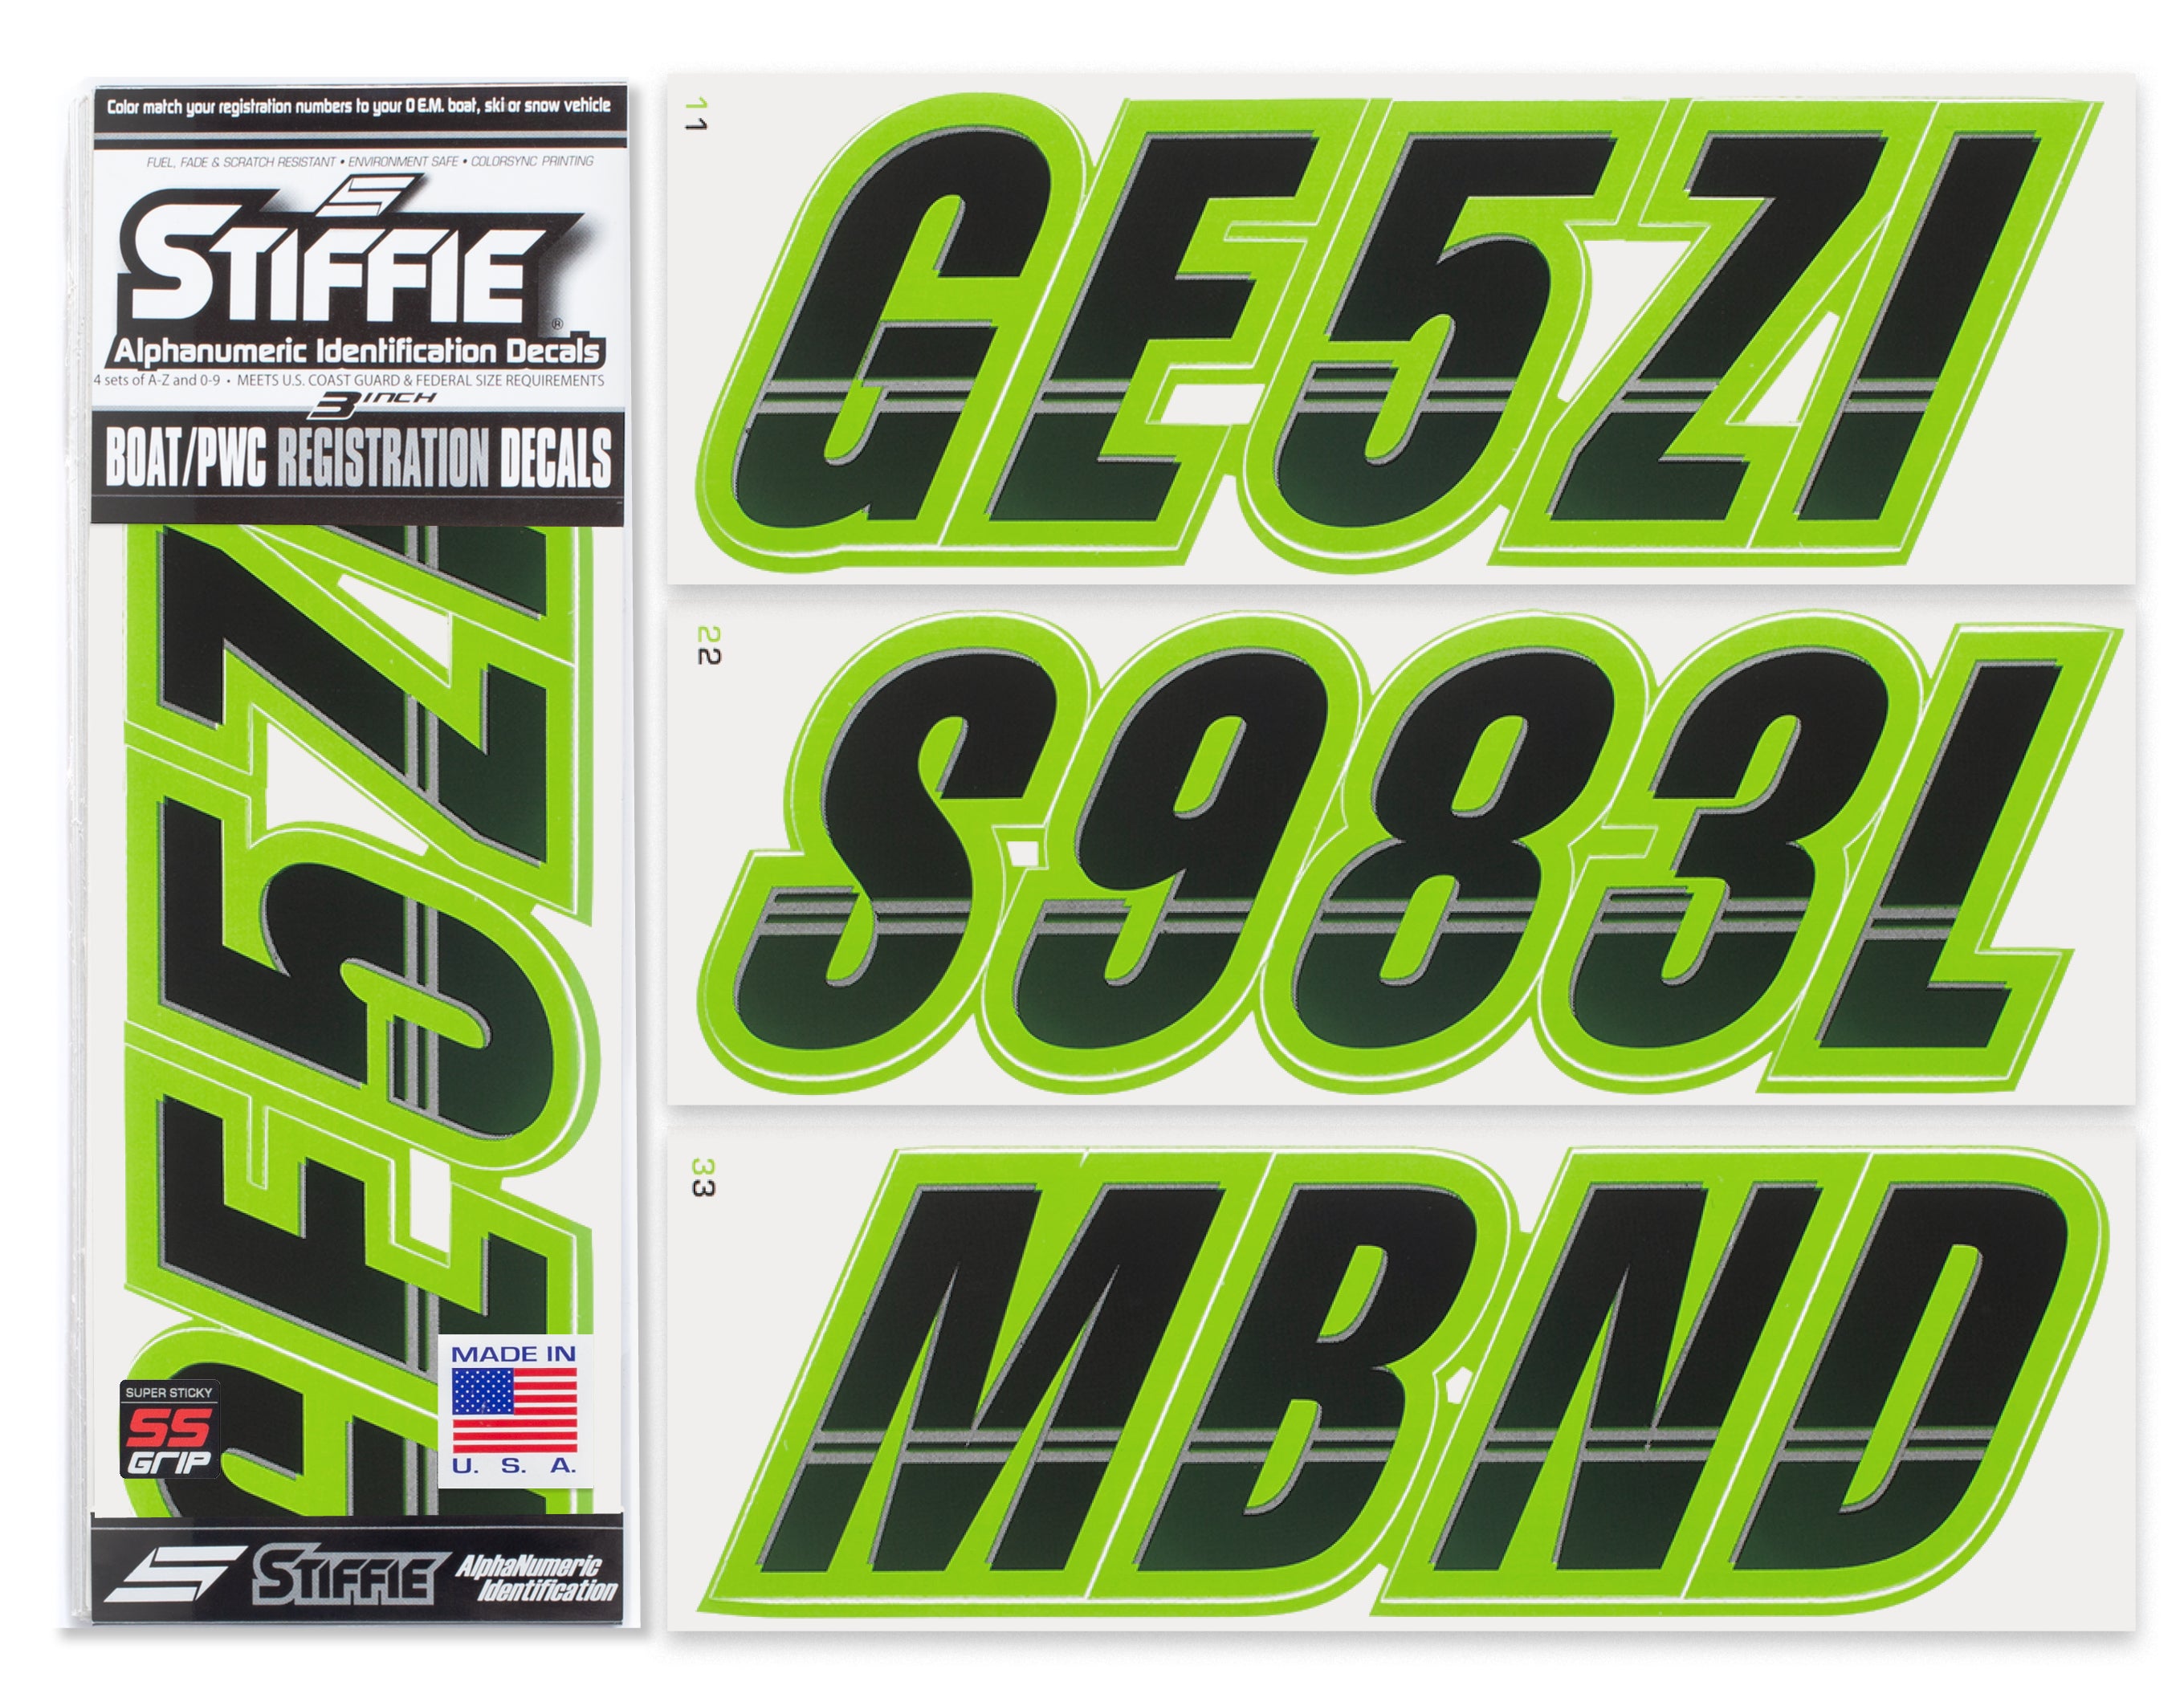 Stiffie Techtron Black/Team Green Super Sticky 3" Alpha Numeric Registration Identification Numbers Stickers Decals for Sea-Doo Spark, Inflatable Boats, Ribs, Hypalon/PVC, PWC and Boats